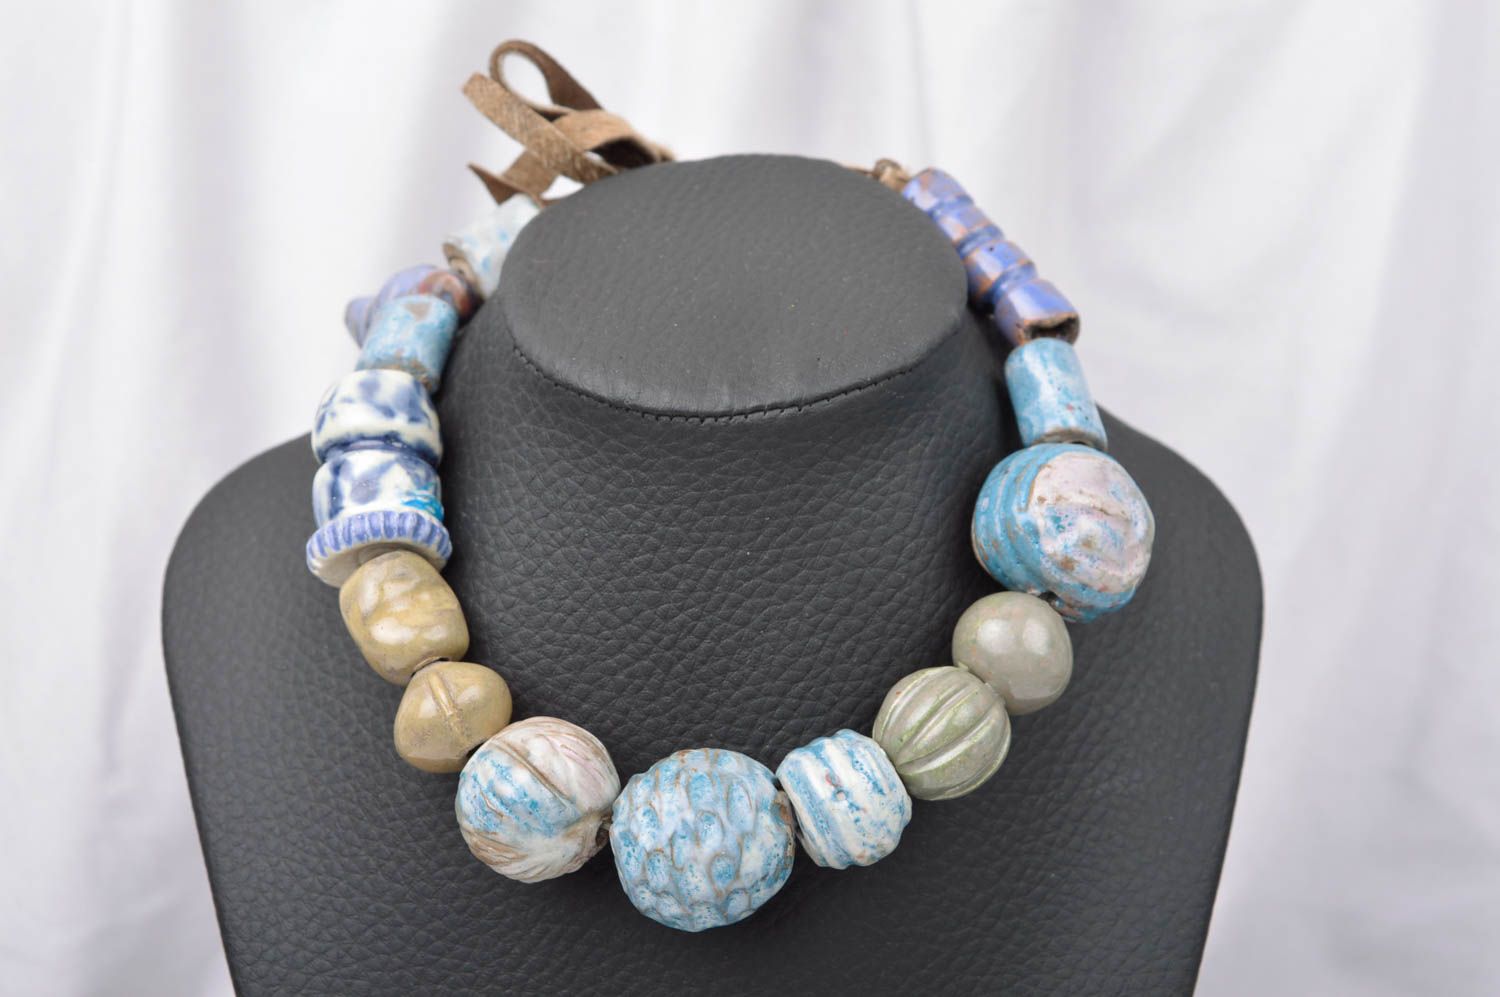 Stylish handmade ceramic necklace bead necklace design fashion tips for her photo 1